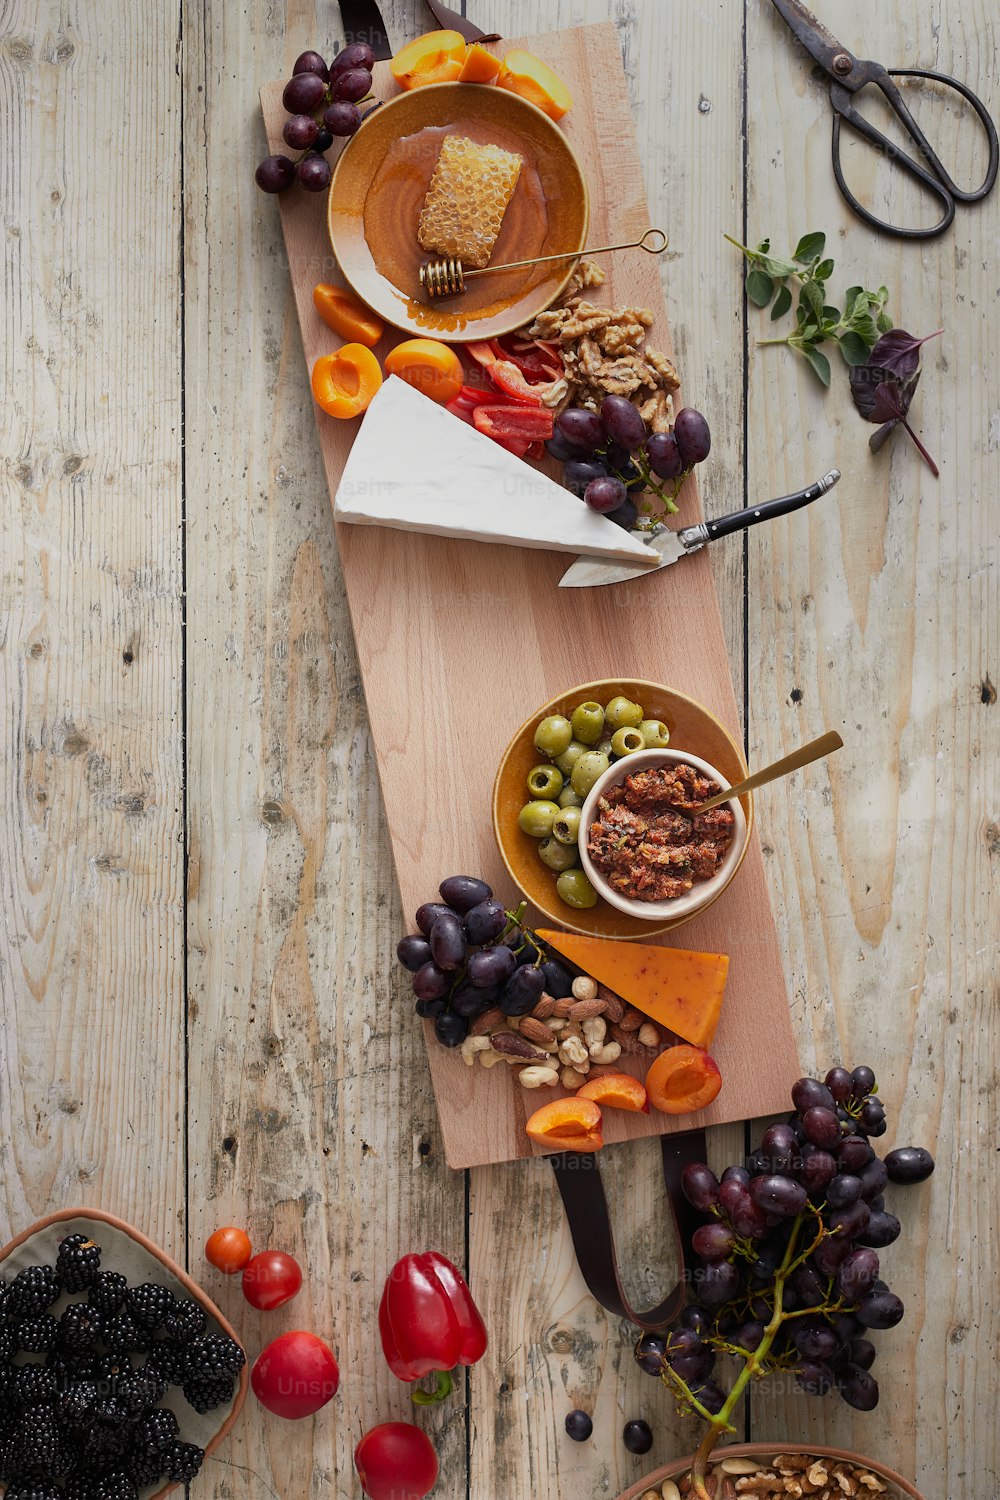 a wooden table topped with bowls of food